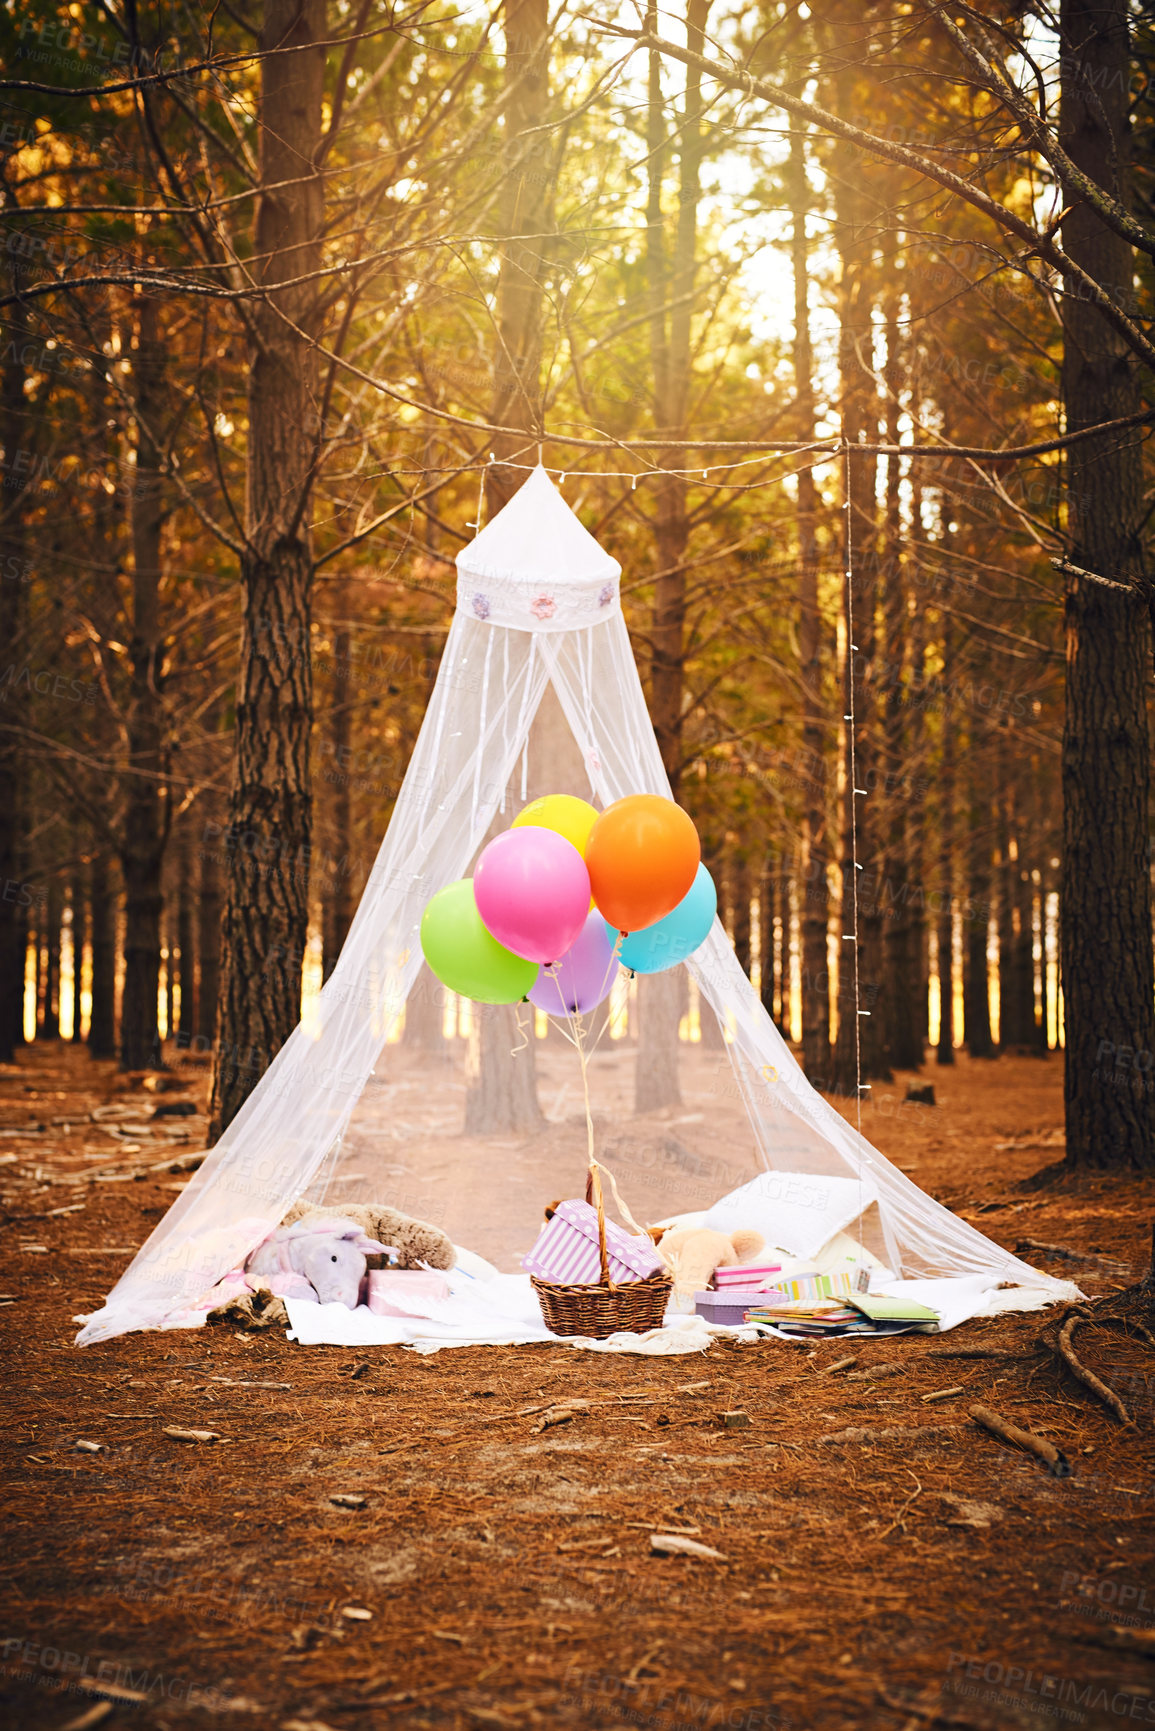 Buy stock photo Shot of a tent made for a children's birthday party filled with balloons and presents outside in the woods